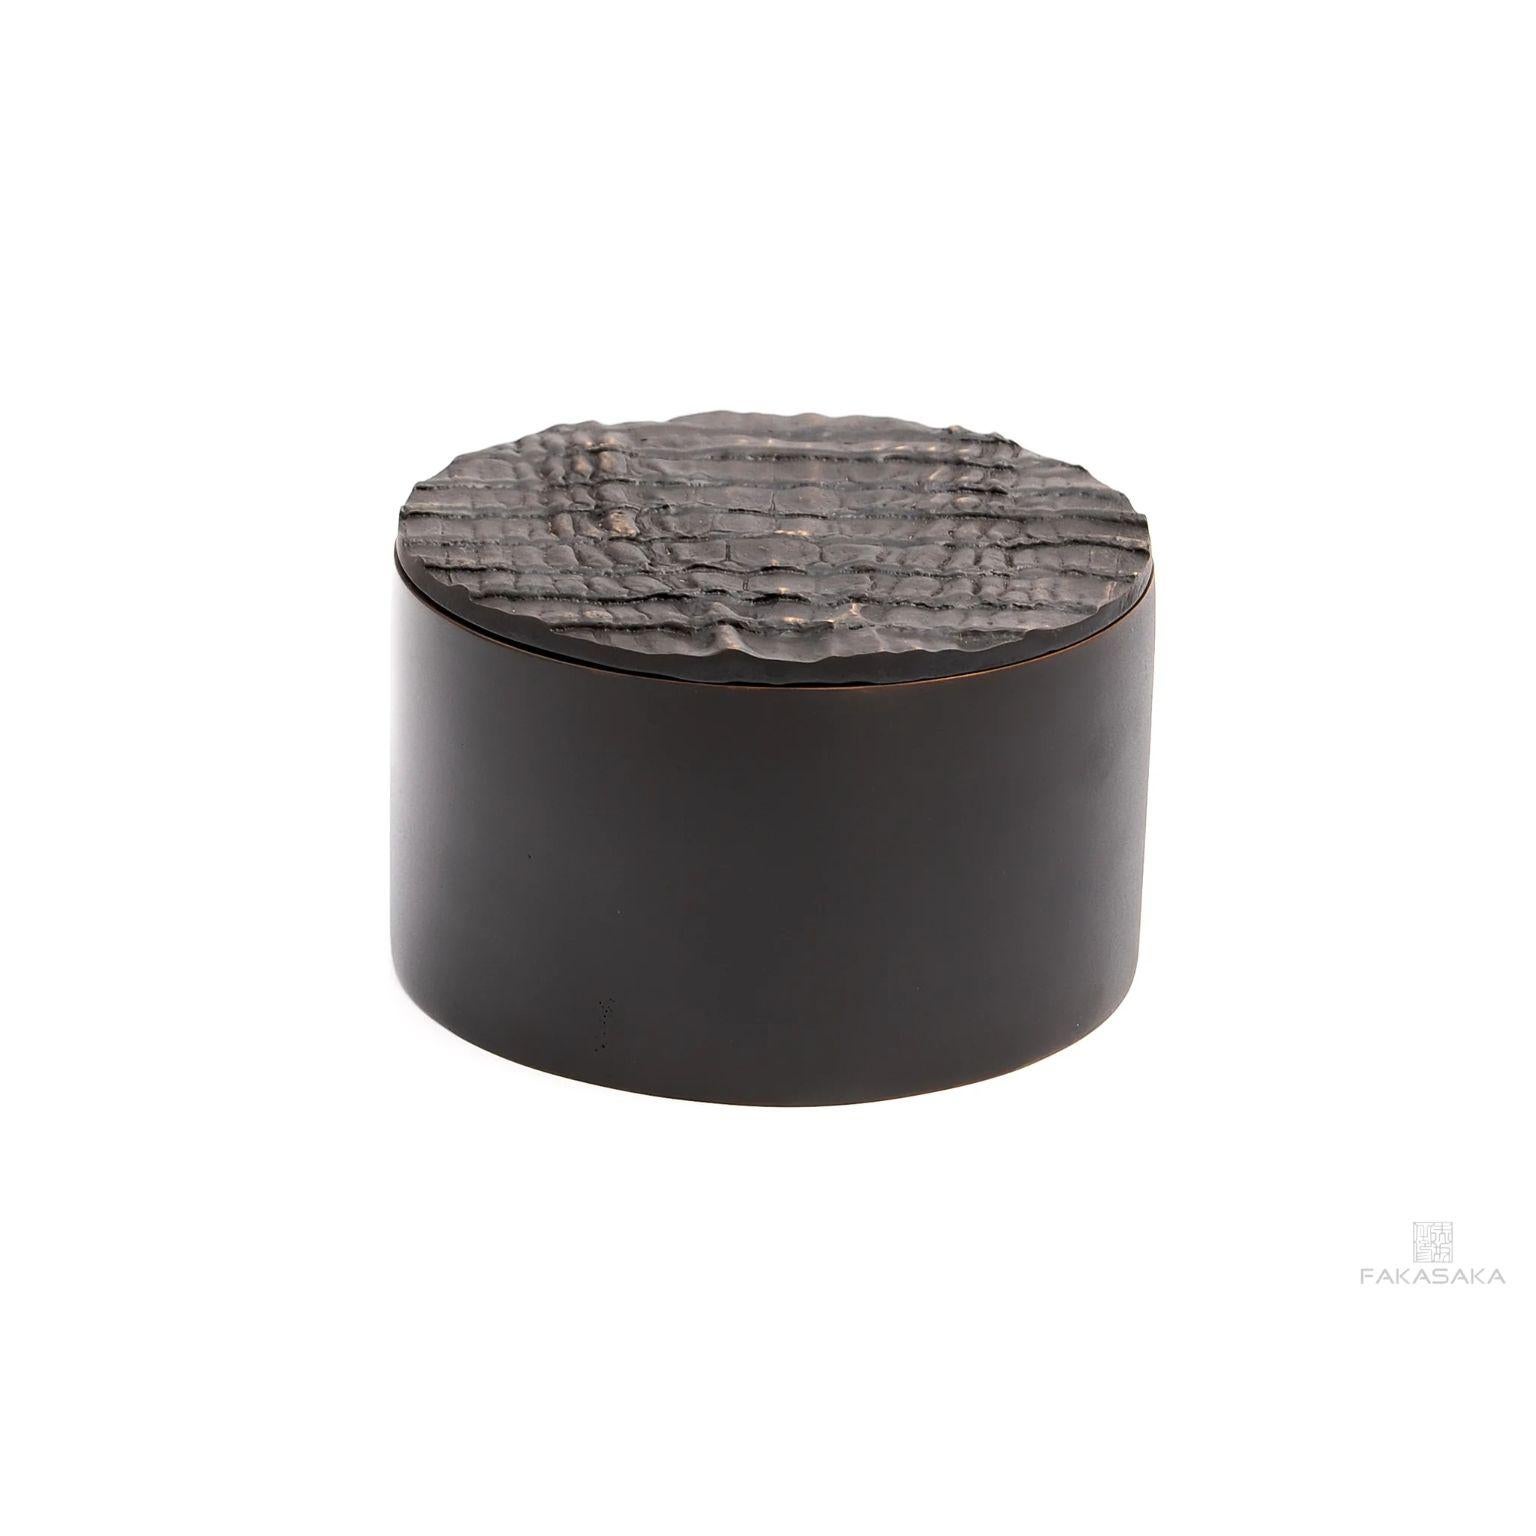 Aretha box by Fakasaka Design
Dimensions: W 15 cm D 15 cm H 9.5 cm.
Materials: black/brown bronze.
Also available in polished bronze.

 FAKASAKA is a design company focused on production of high-end furniture, lighting, decorative objects,